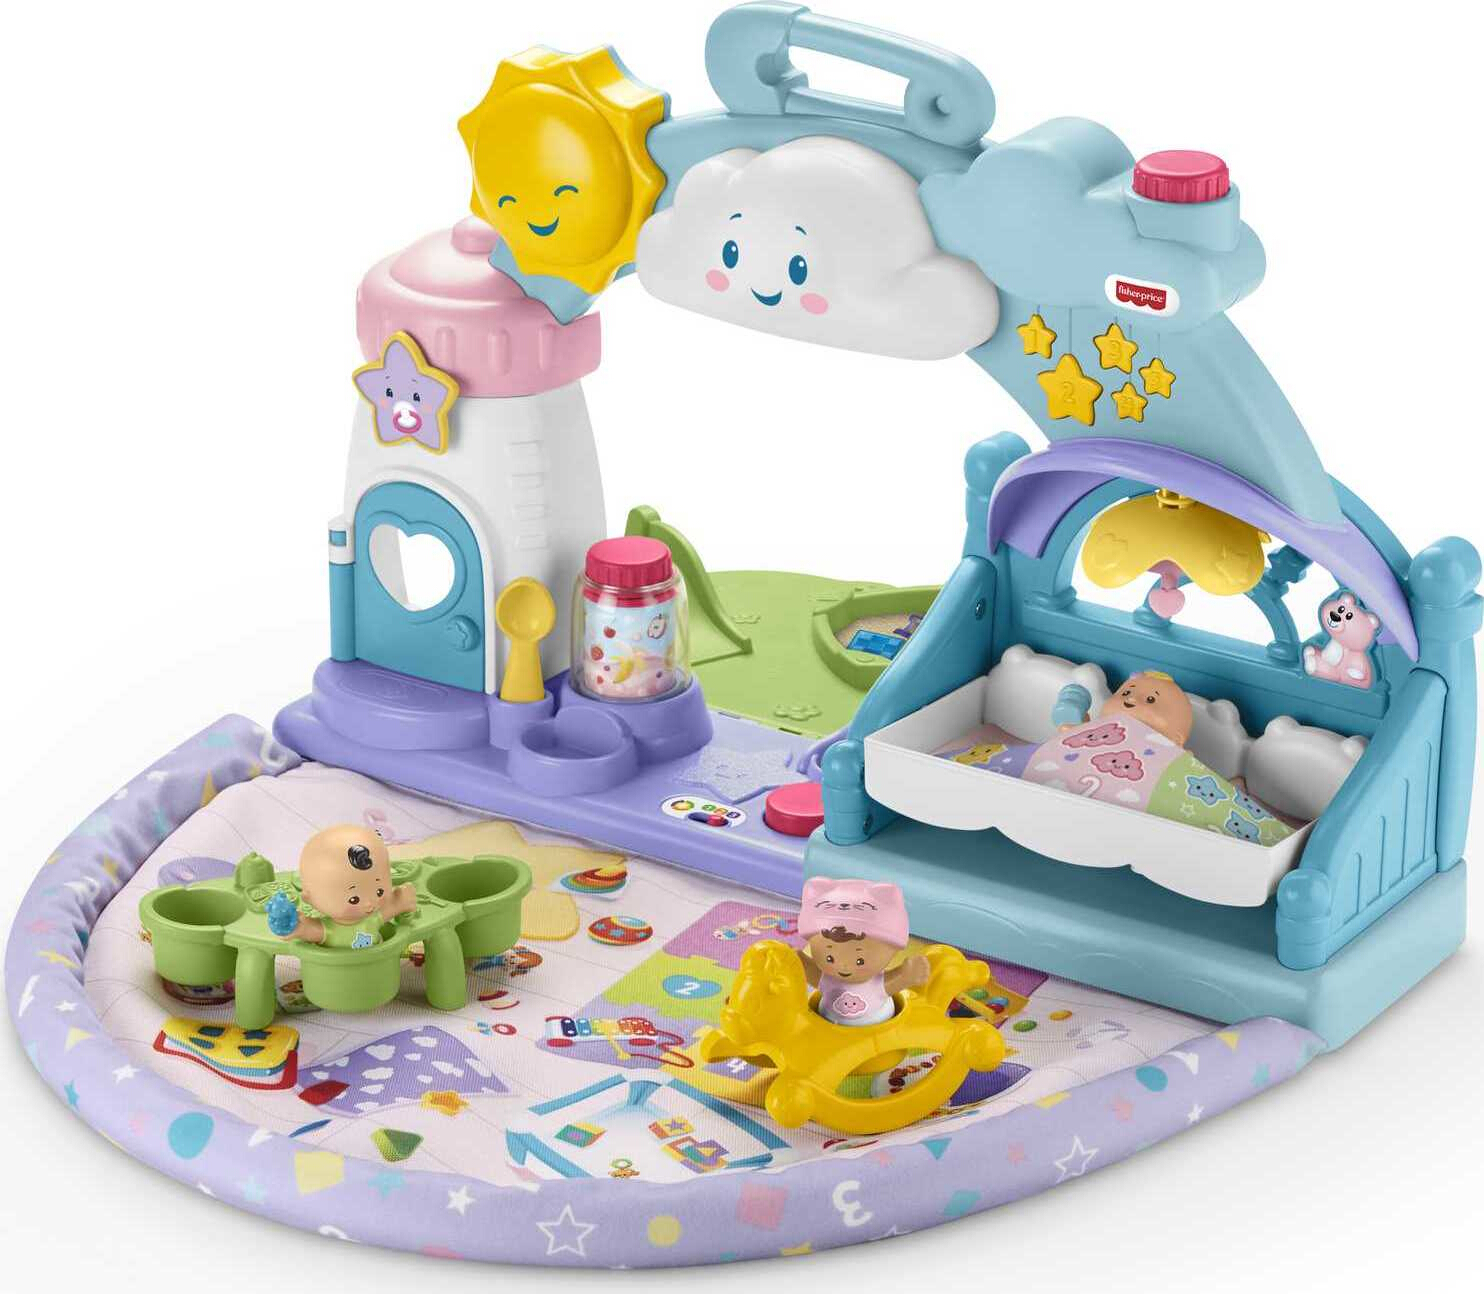 Fisher-Price Little People 1-2-3 Babies Playdate Musical Playset with 3 Multi-color Baby Dolls - image 4 of 7